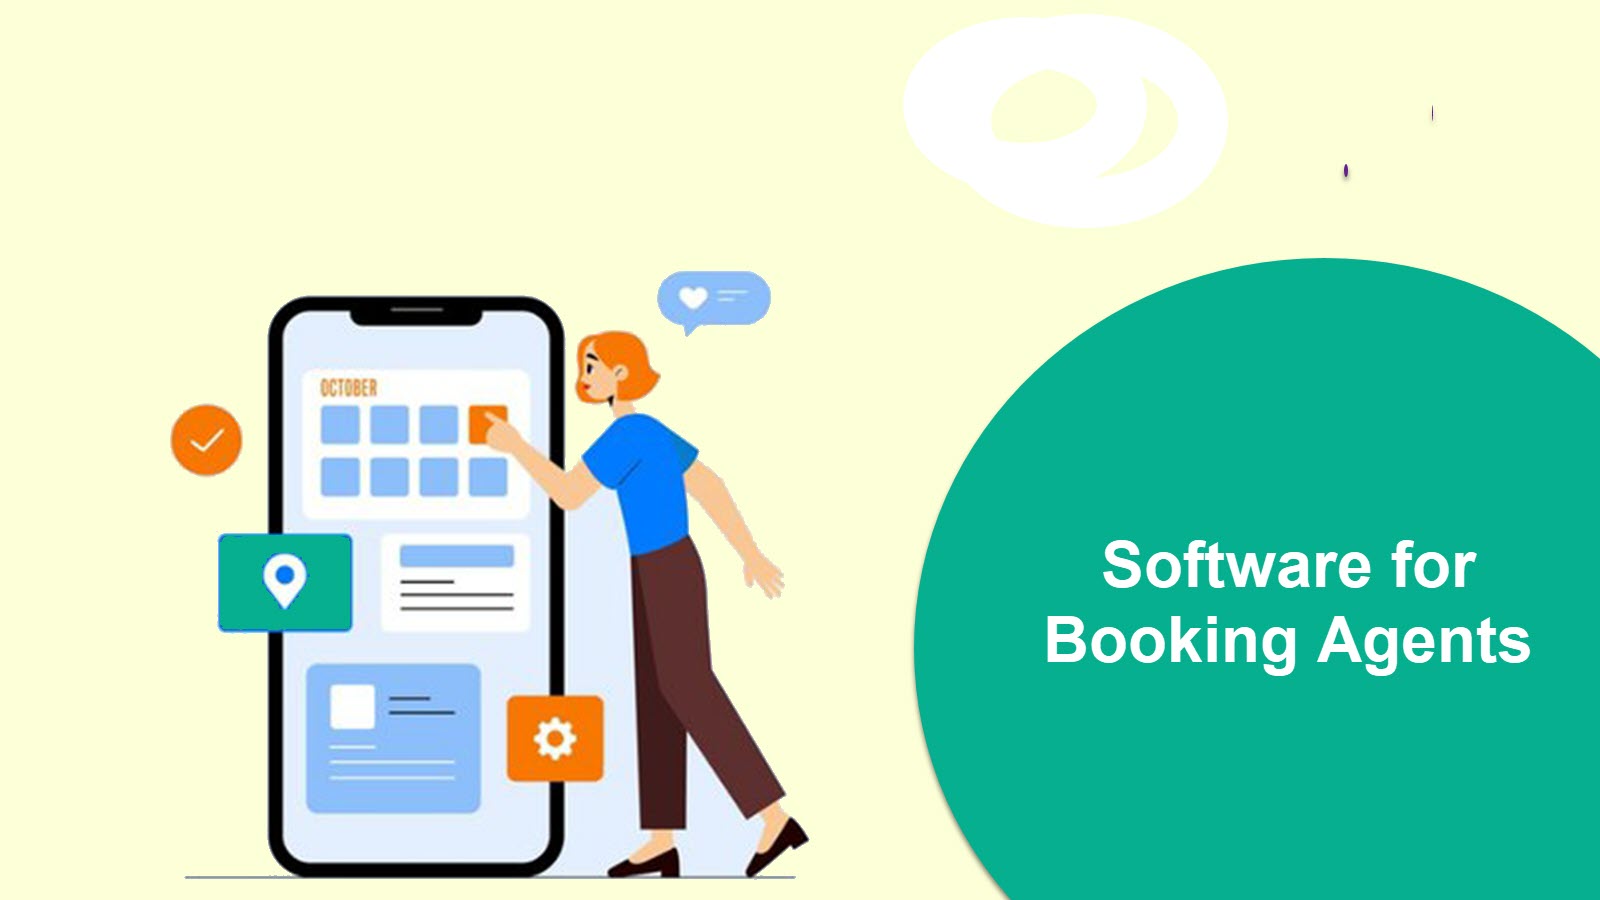 Software for booking agents